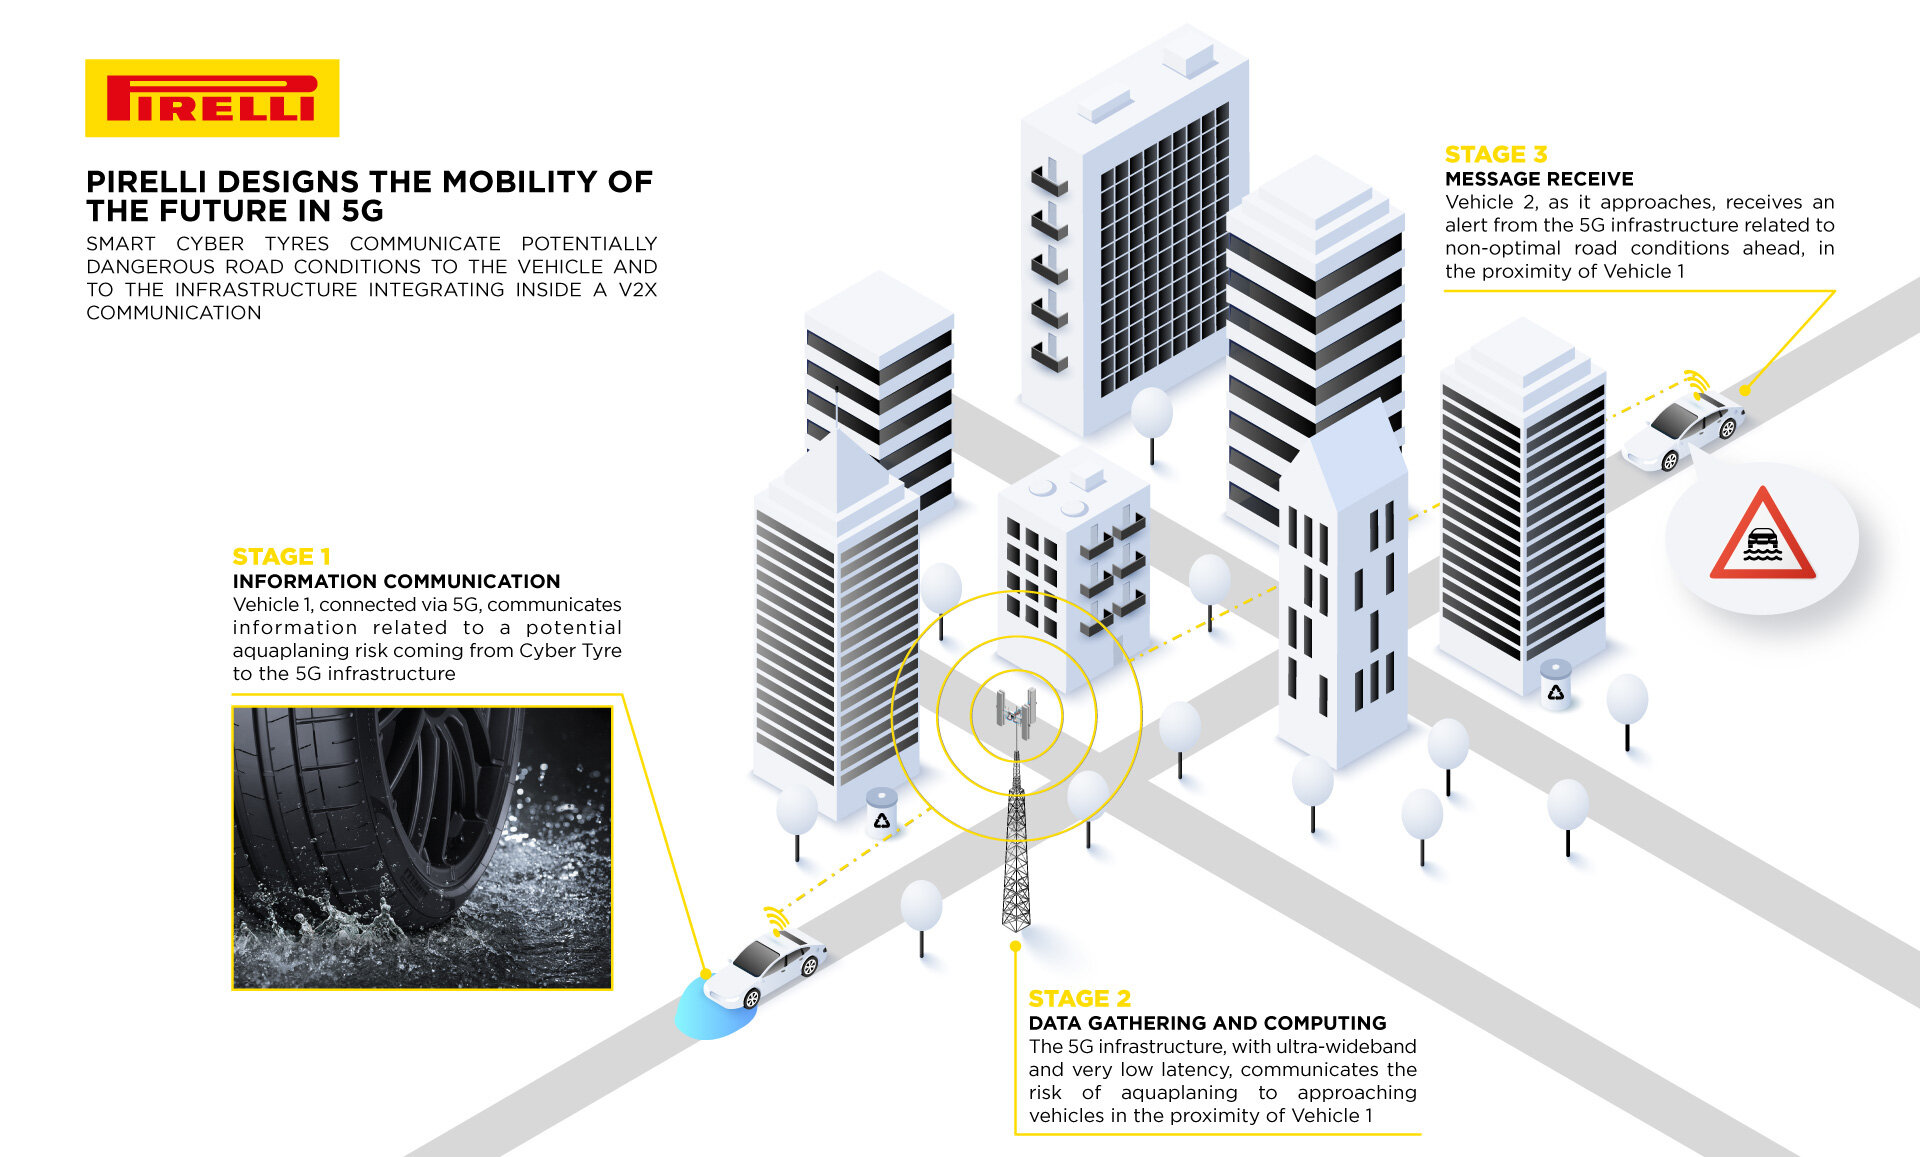 Pirelli 5G enabled Cyber Tyre infographic.jpg